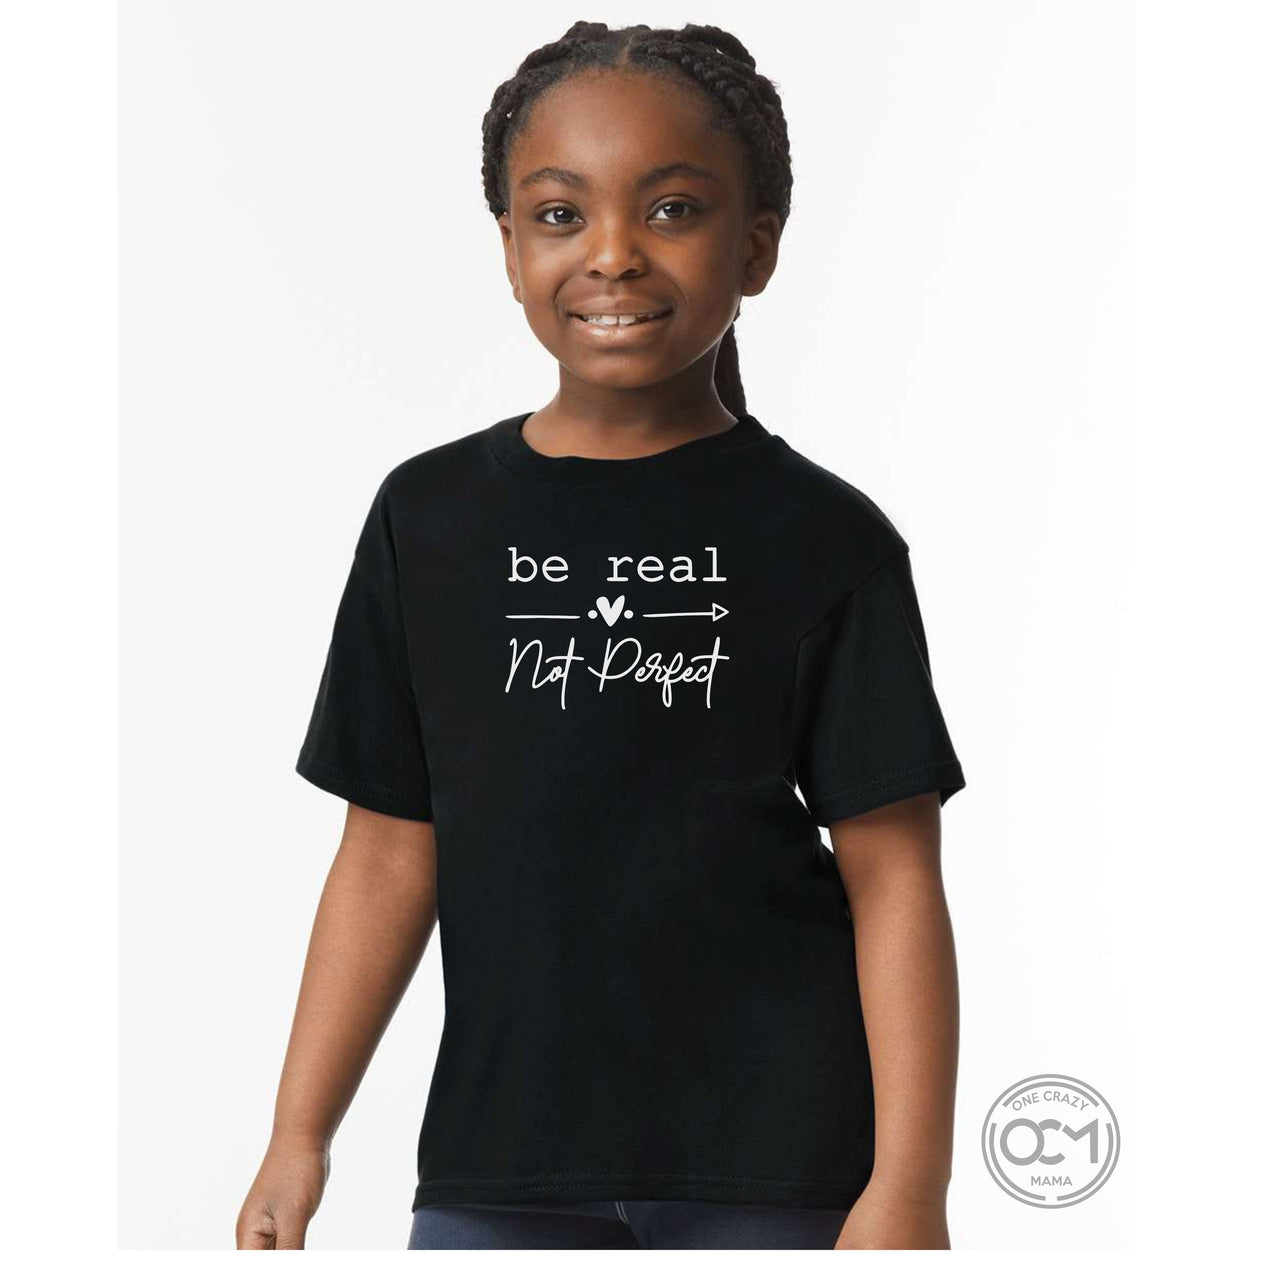 Youth - Unisex Cotton/Poly Tee - (Be Real Not Perfect)